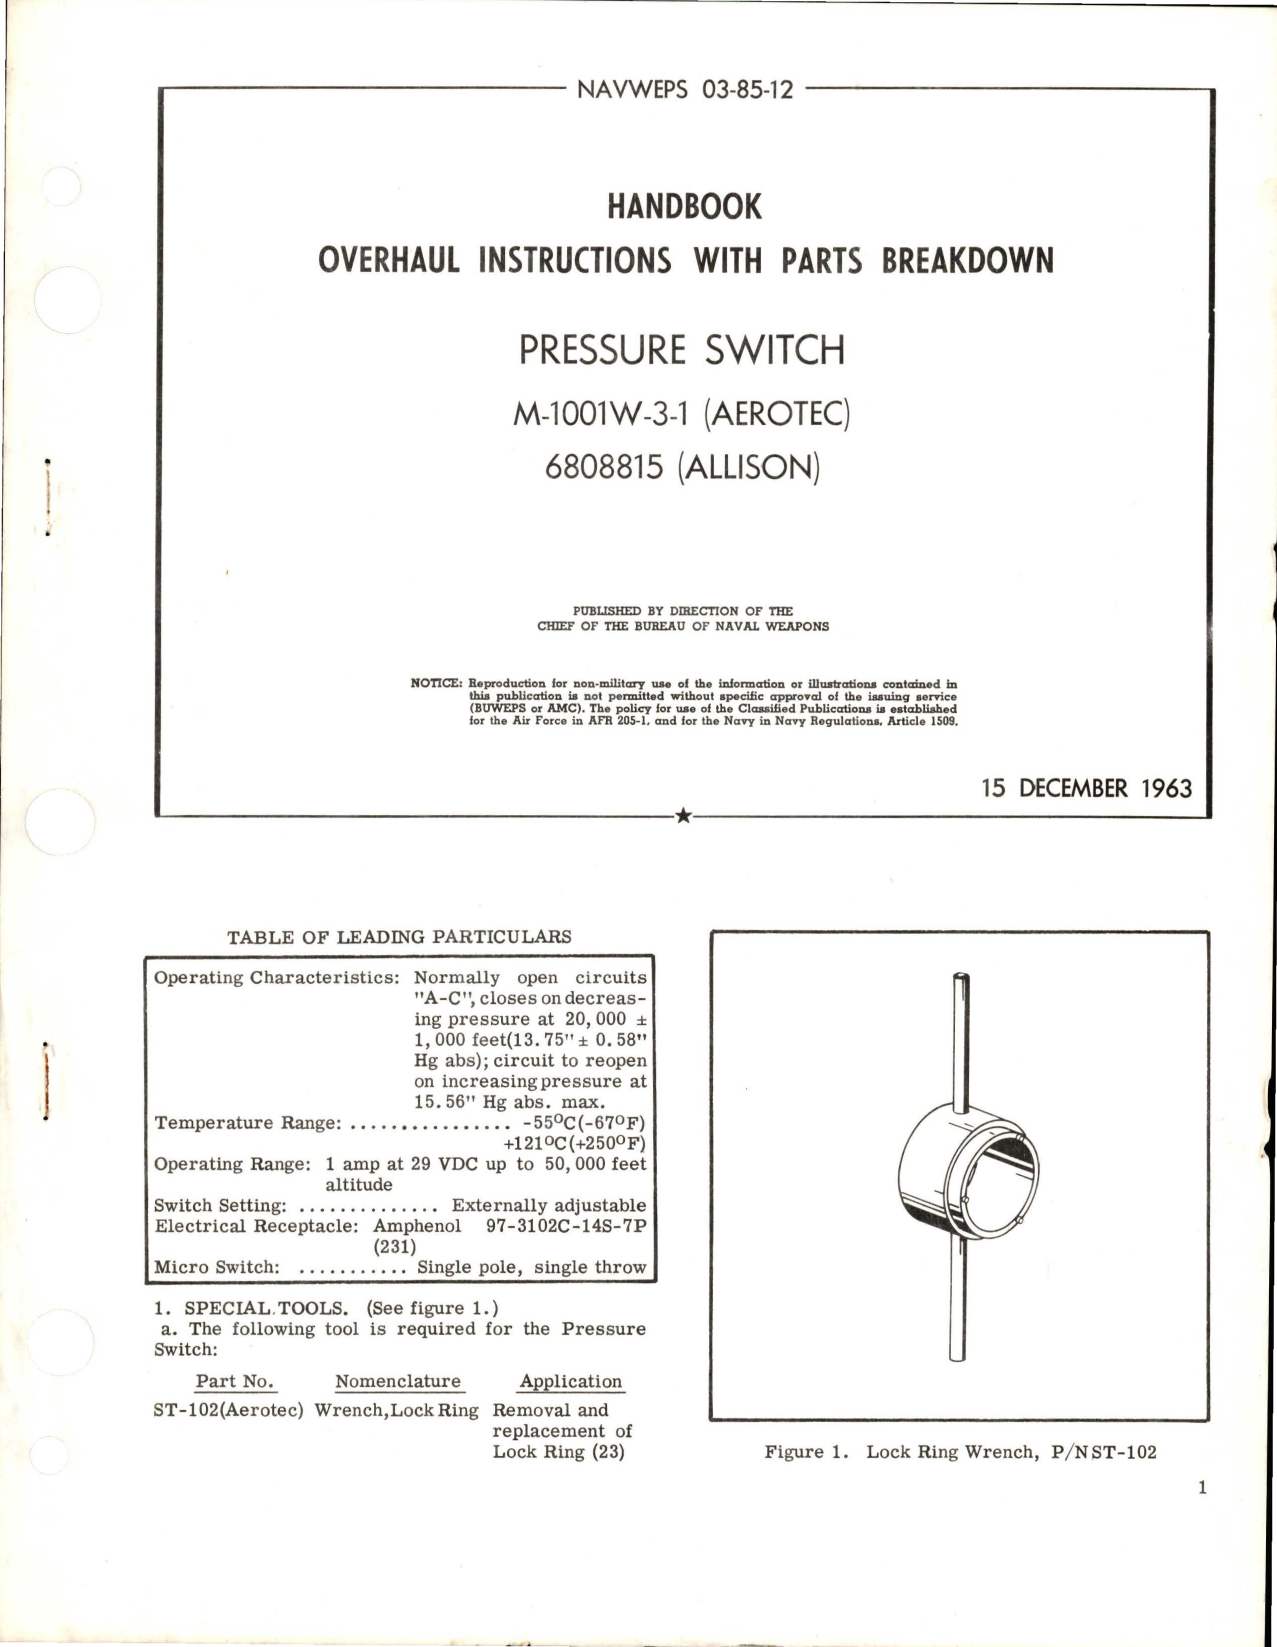 Sample page 1 from AirCorps Library document: Overhaul Instructions with Parts Breakdown for Pressure Switch - M-1001W-3-1 (Aerotec) - 6808815 (Aerotec)